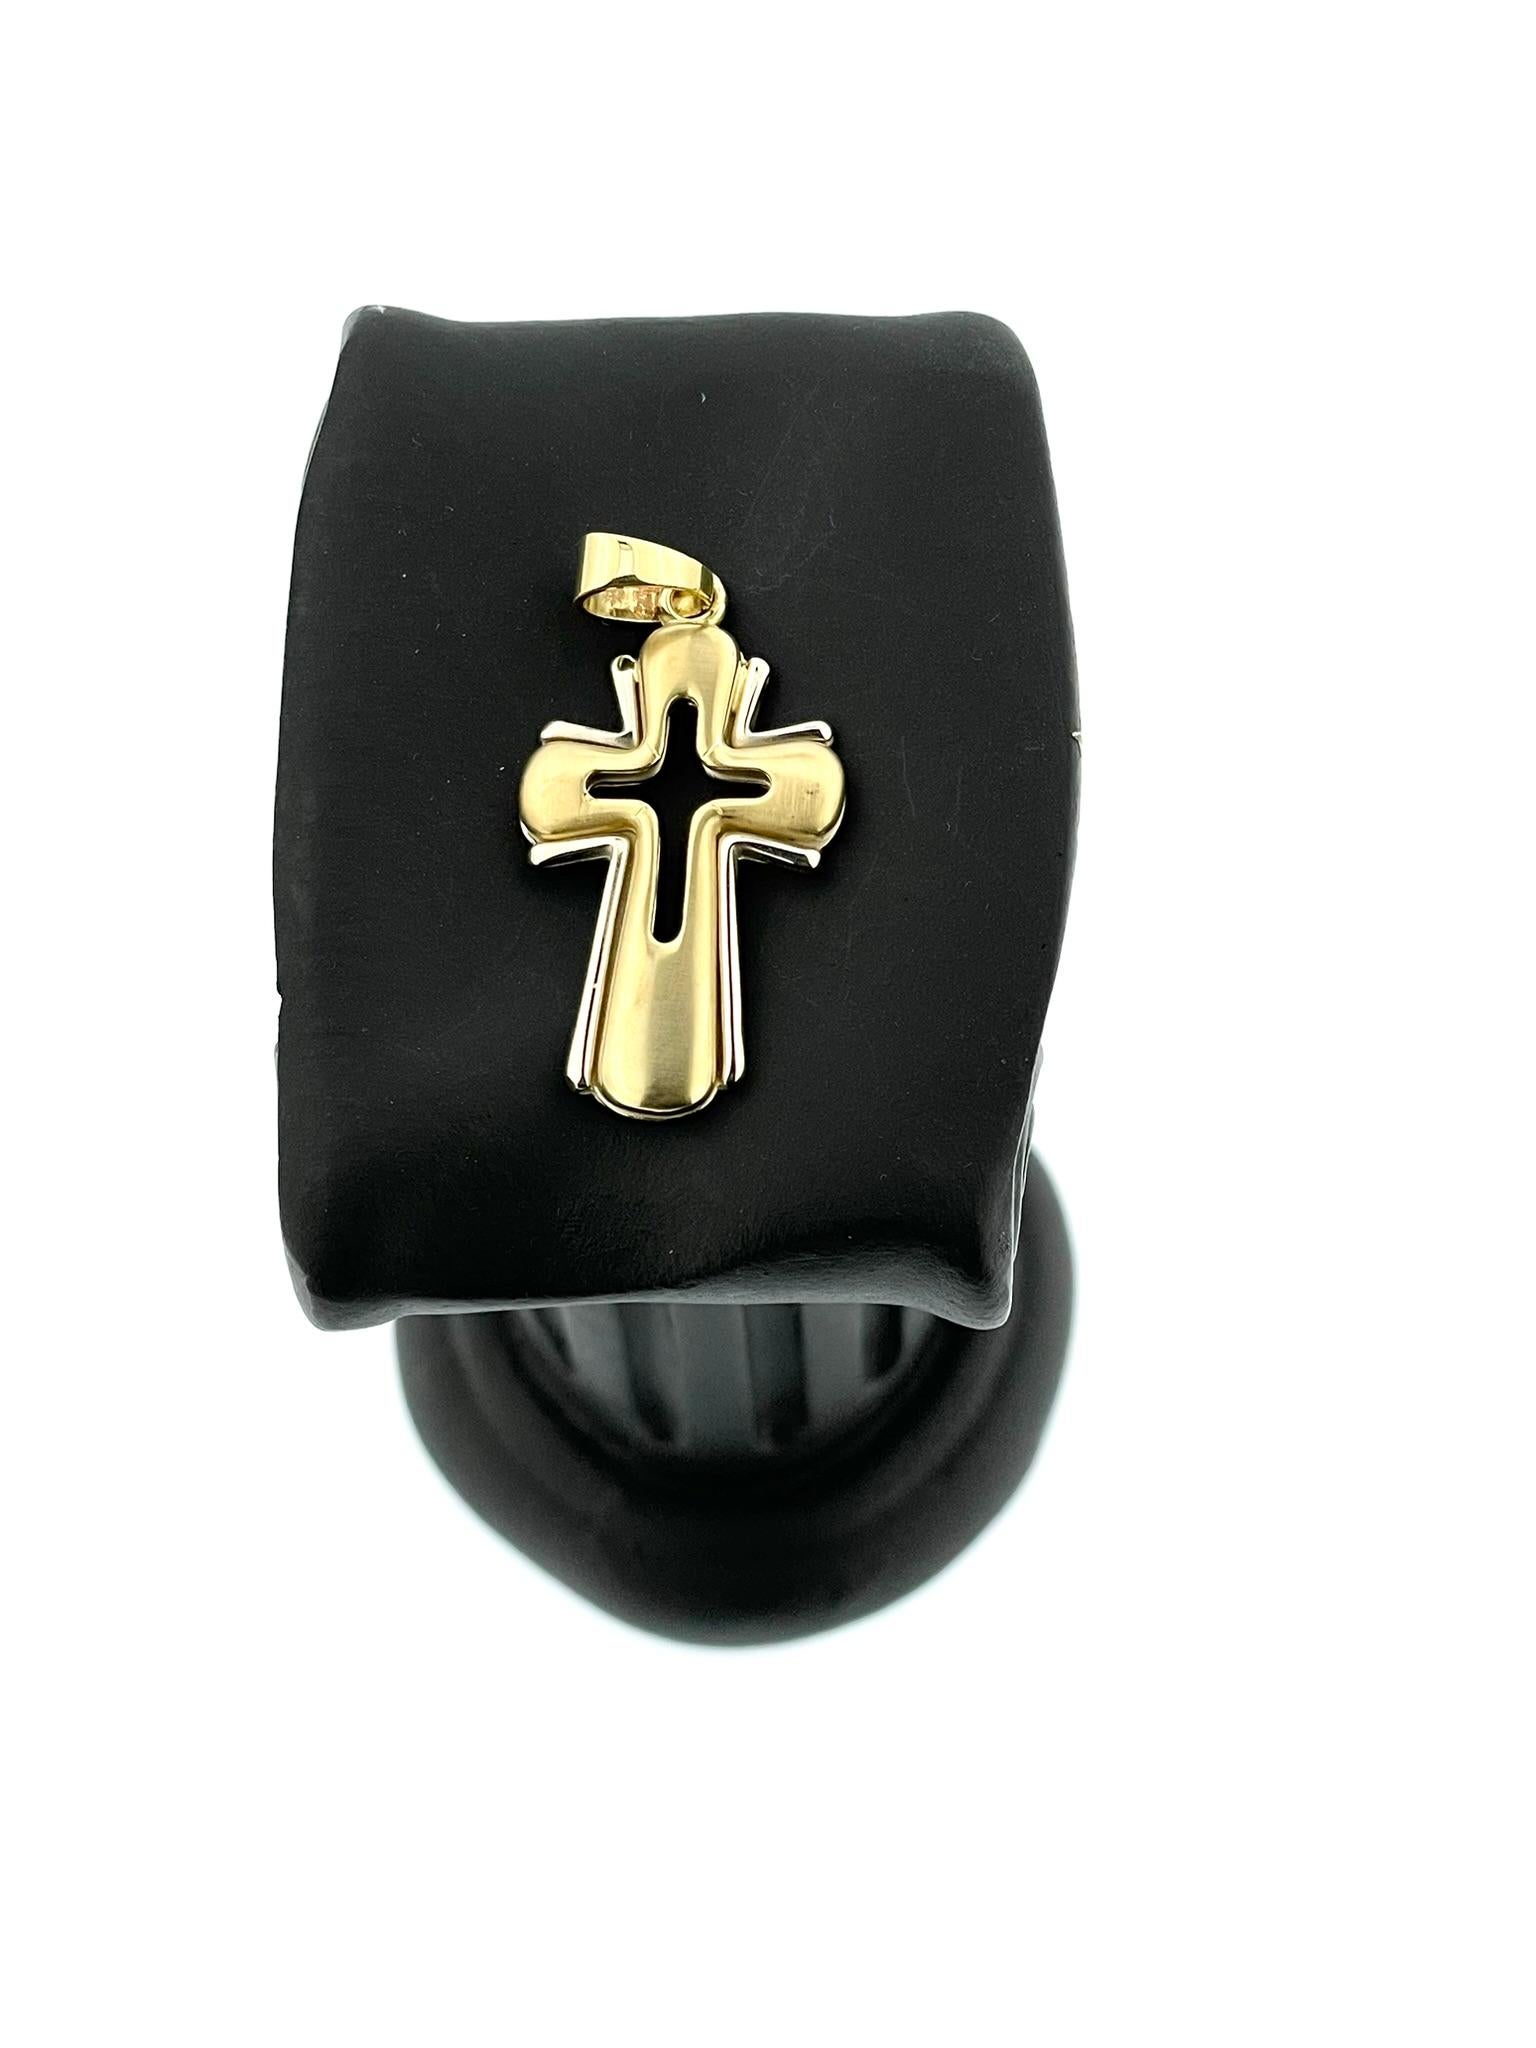 The Yellow and White Gold Italian Cross Satiné, crafted in 18kt gold, epitomizes Italian craftsmanship and elegance. With its satiné finish, this cross exudes a subtle, luxurious sheen that adds depth and texture to its surface.

Italian jewelry is